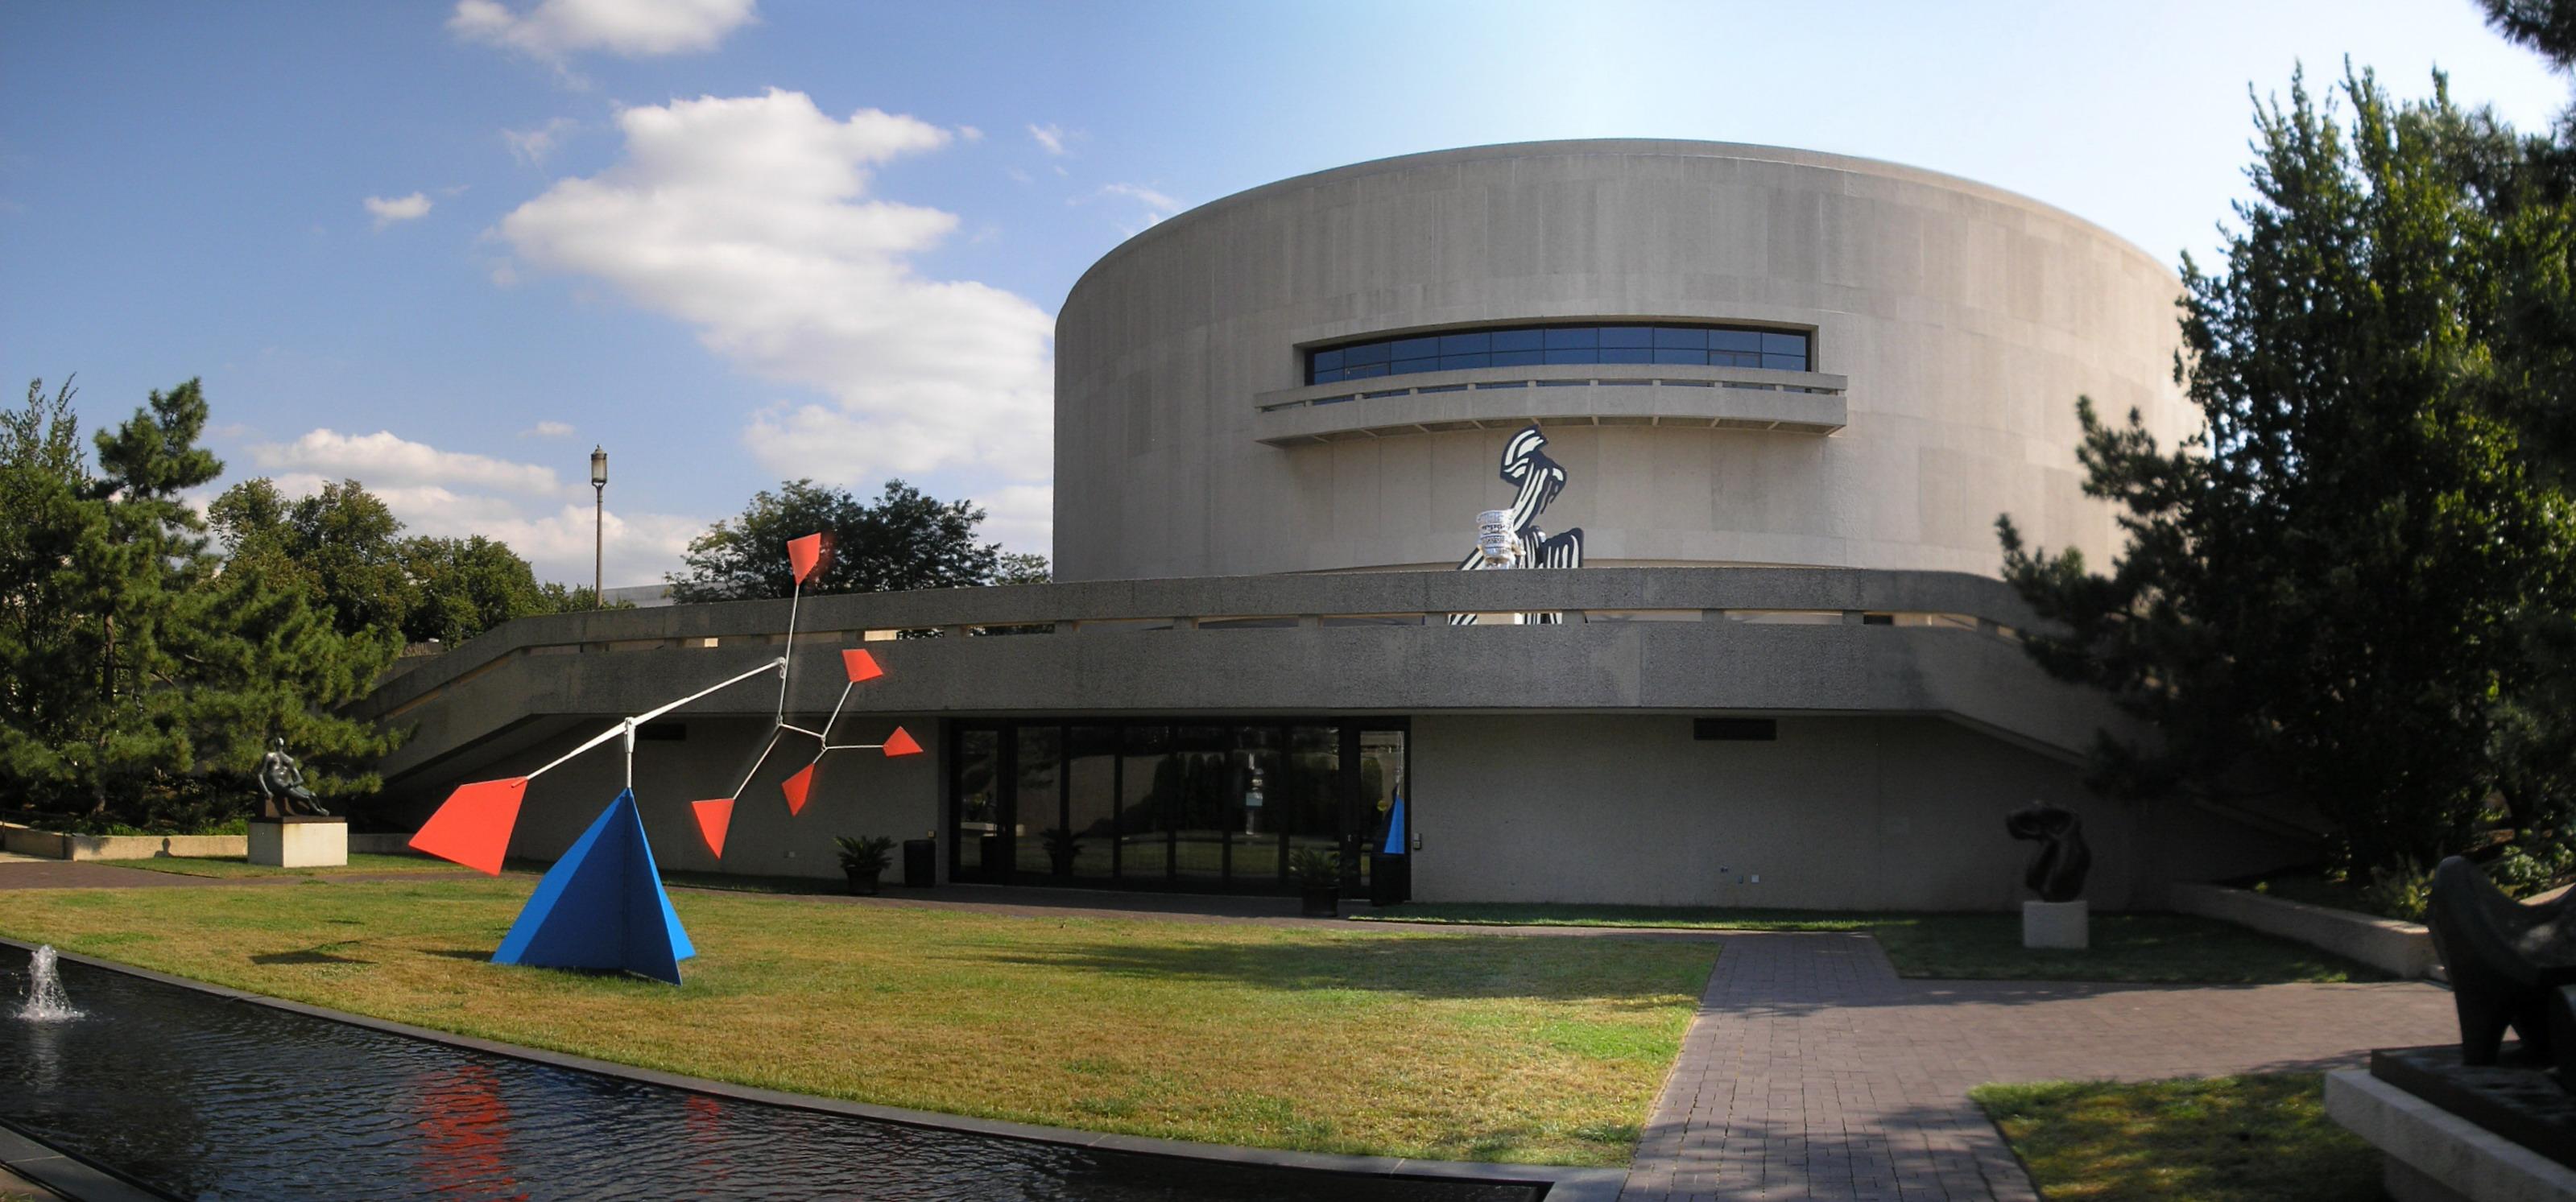 Cover image of this place Hirshhorn Museum and Sculpture Garden